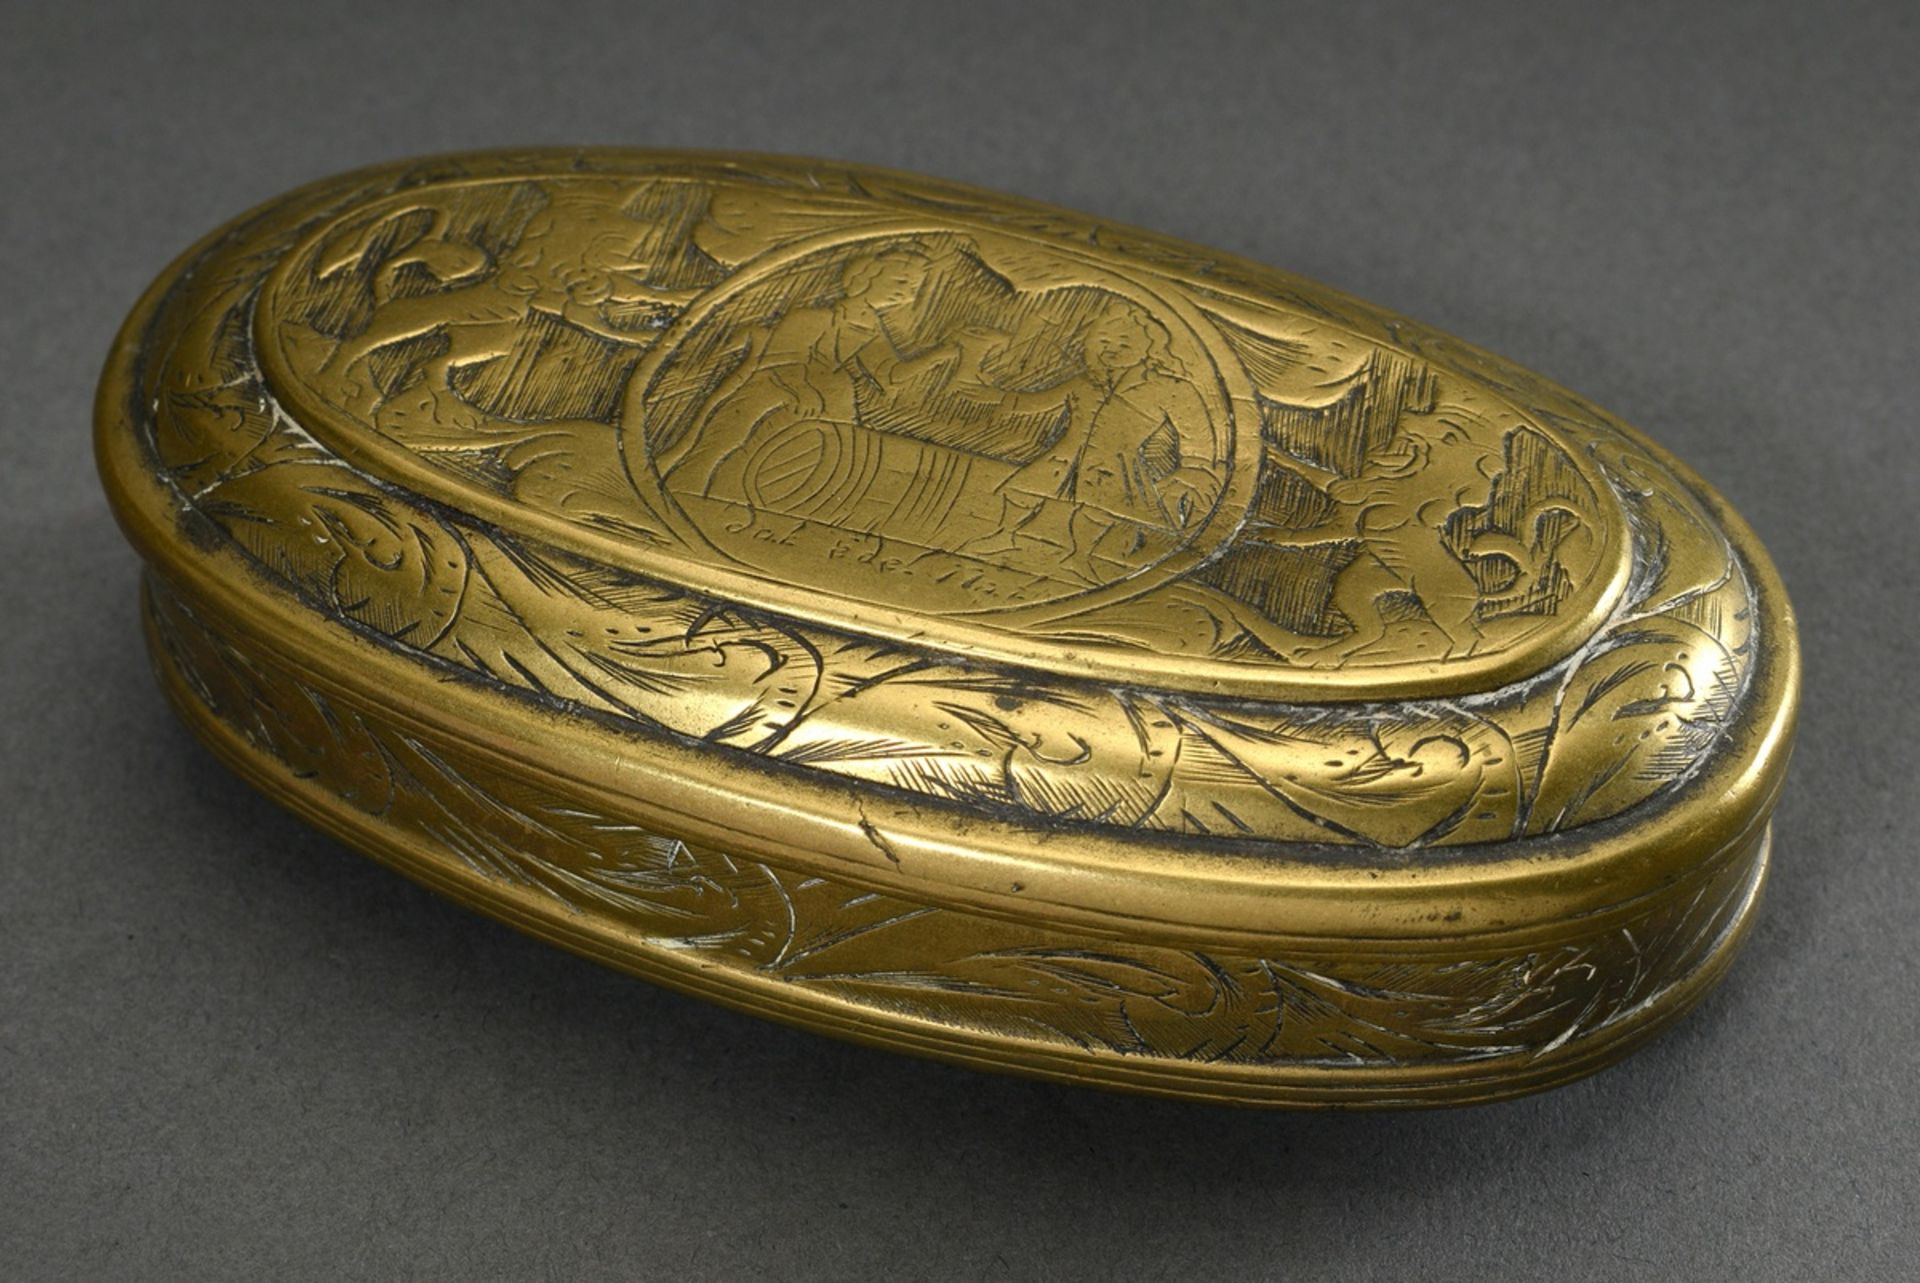 Oval Dutch snuff box with finely engraved scenes in tondi "Drinking couple" (inscribed: dat edel Na